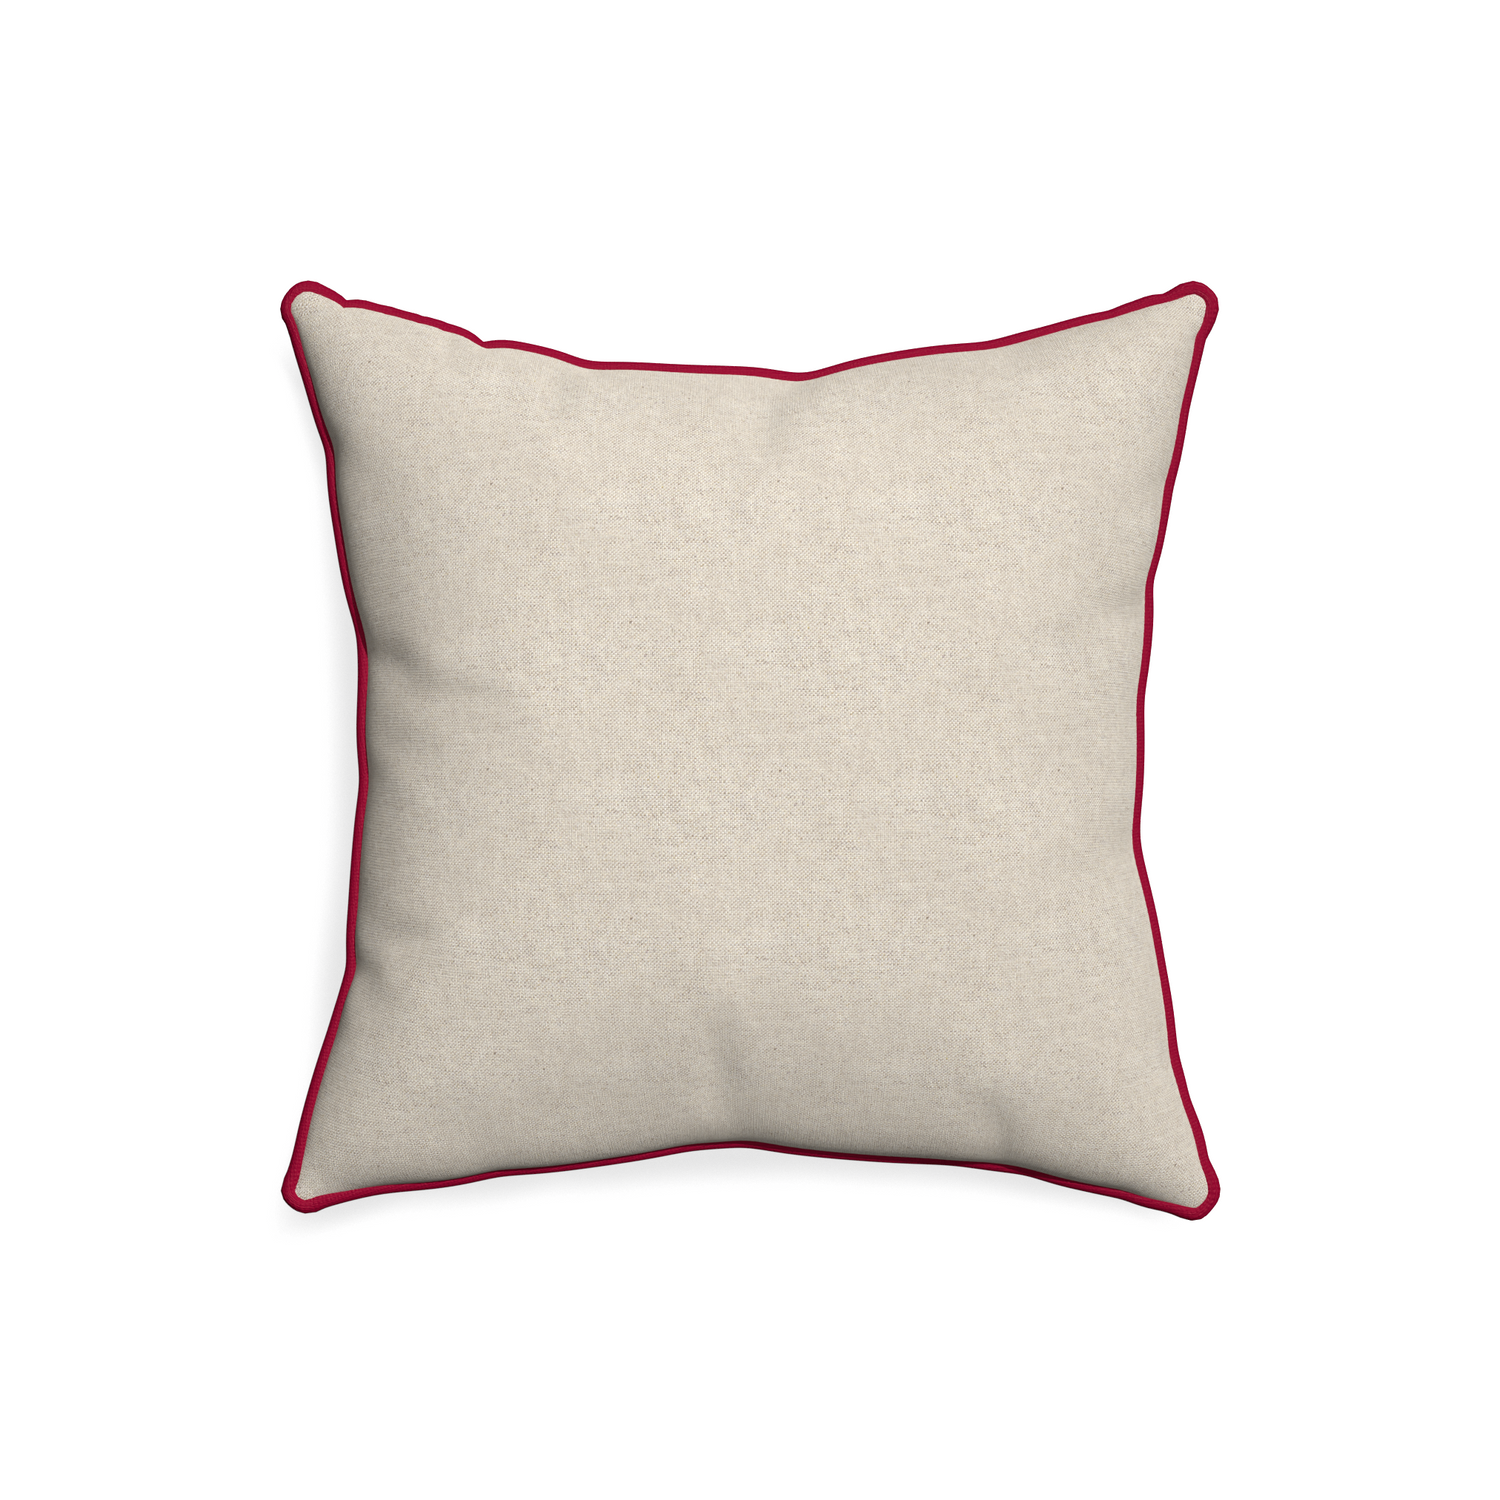 20-square oat custom pillow with raspberry piping on white background